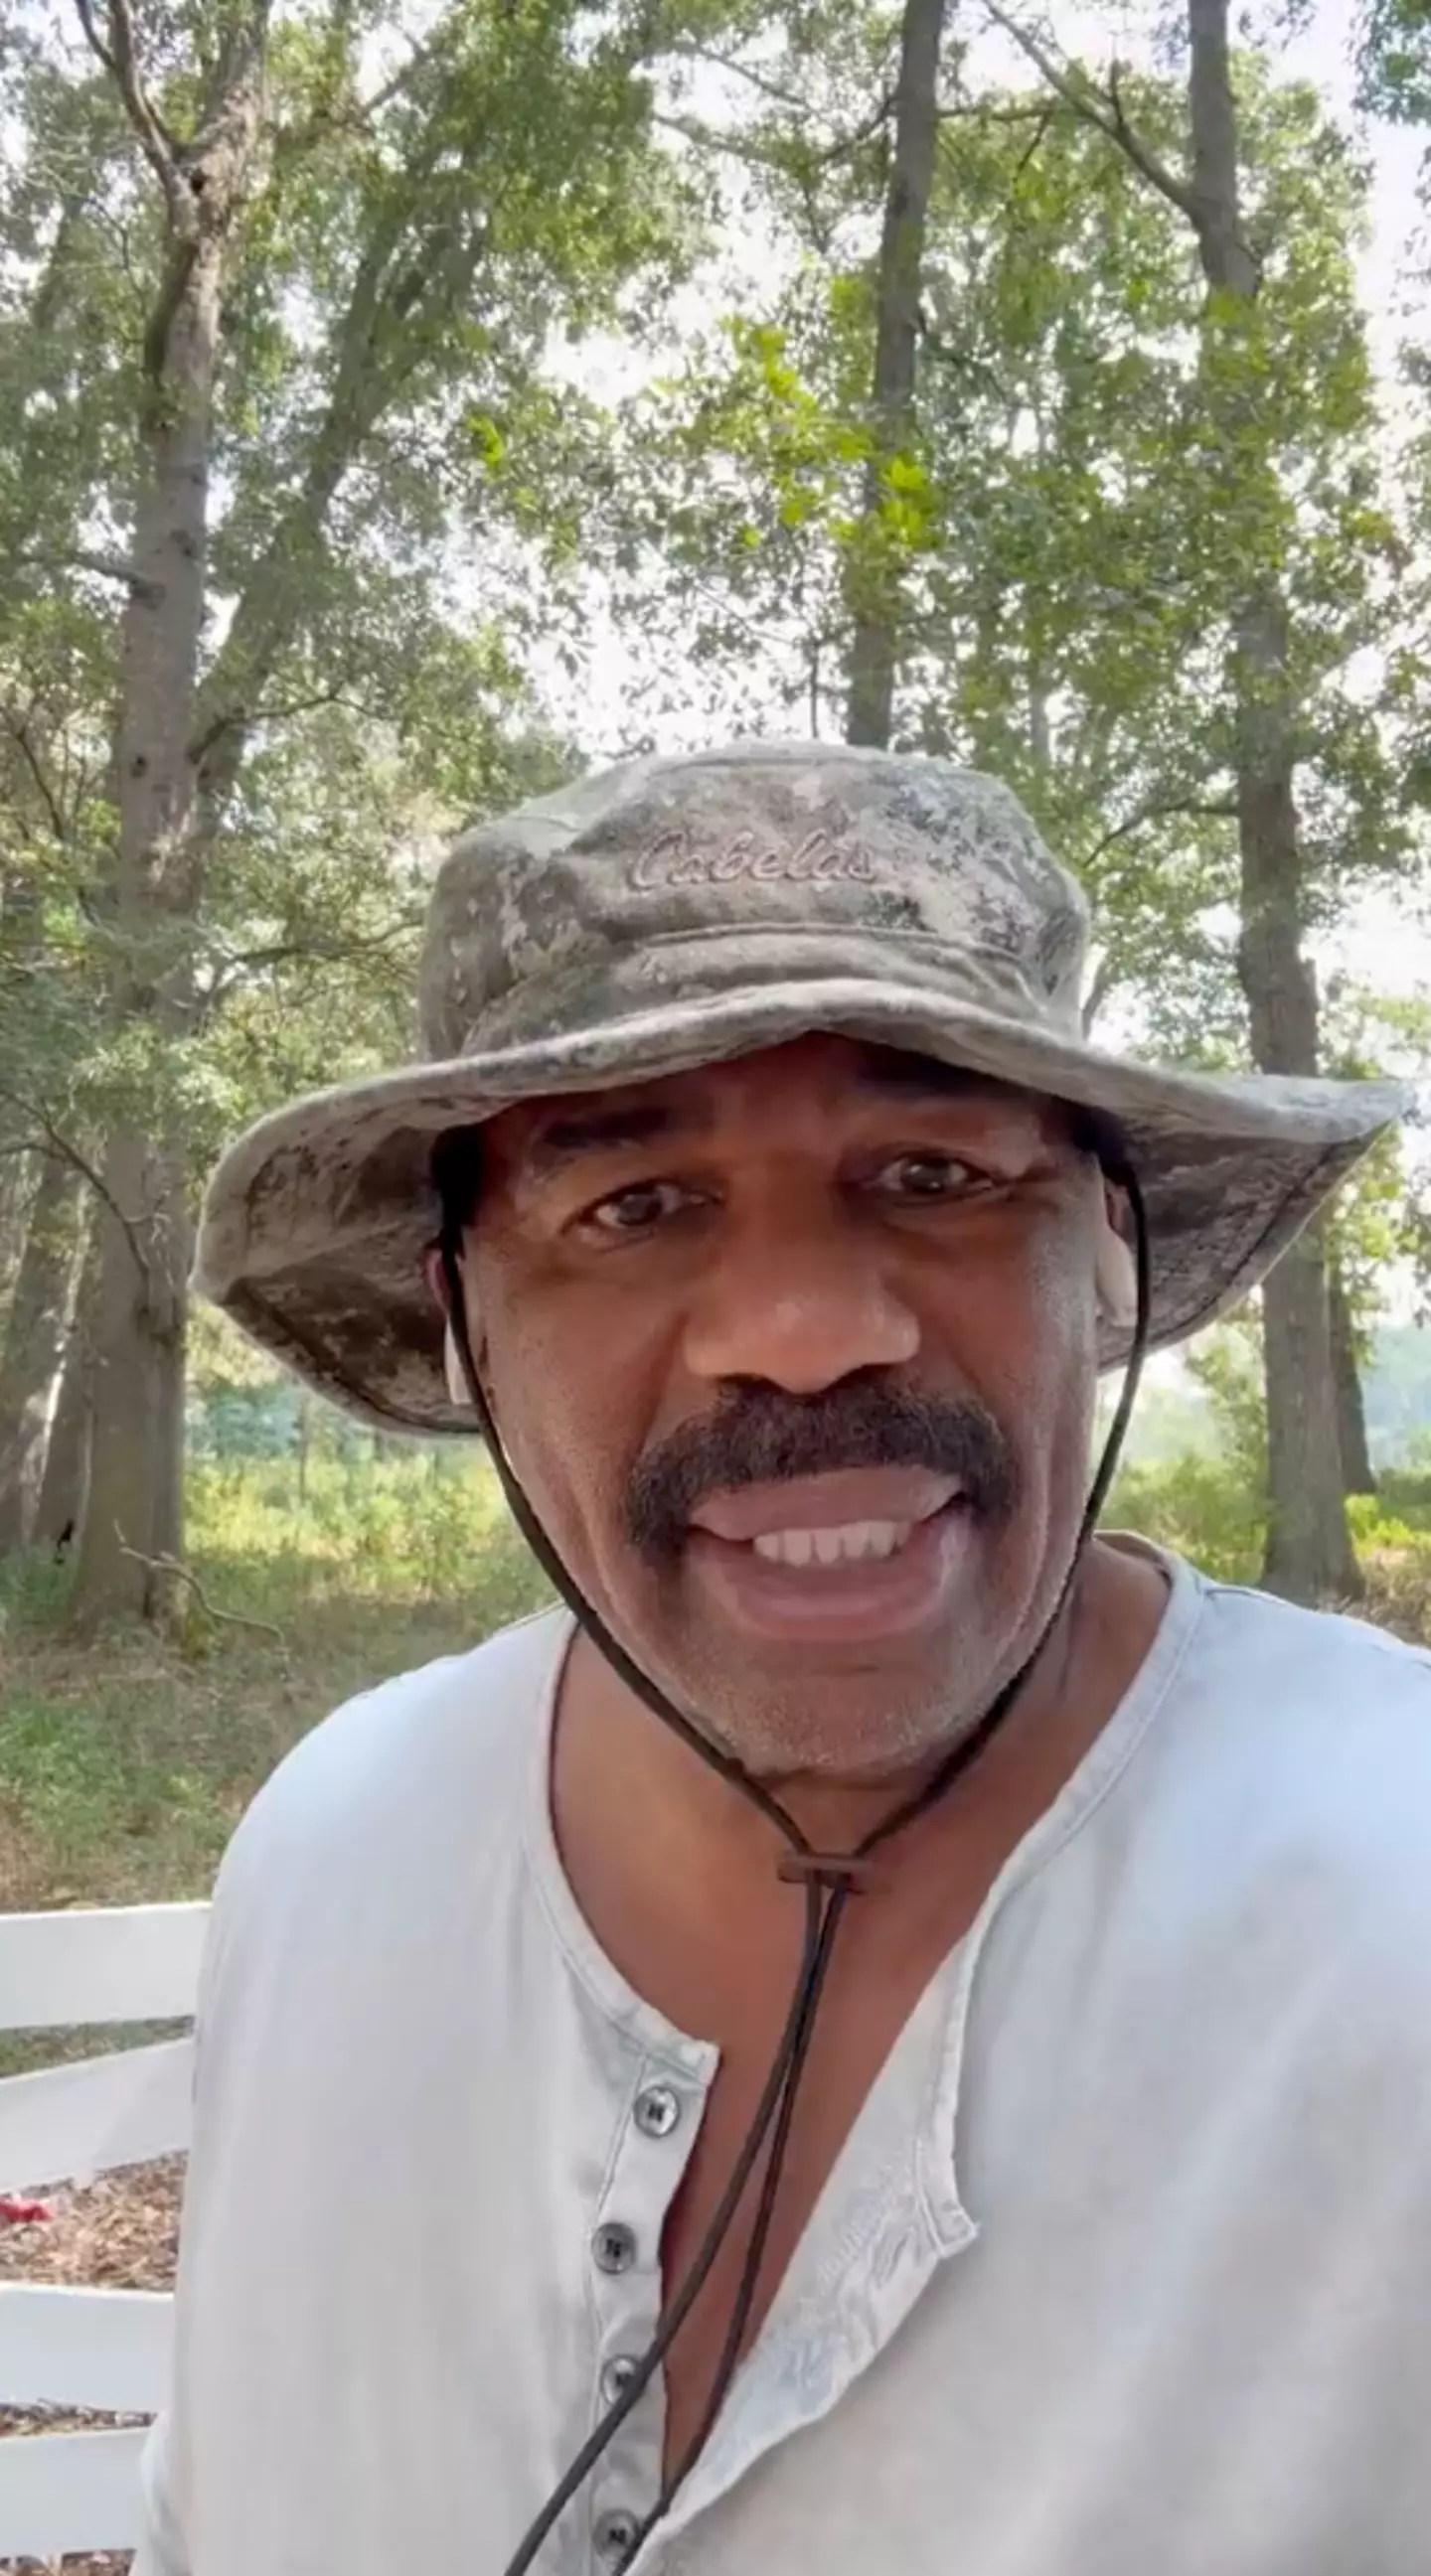 A 'p***ed off' Steve Harvey has apologised for a now-deleted tweet posted from his X account, which asked fans to name a ‘unfunny comedian’.